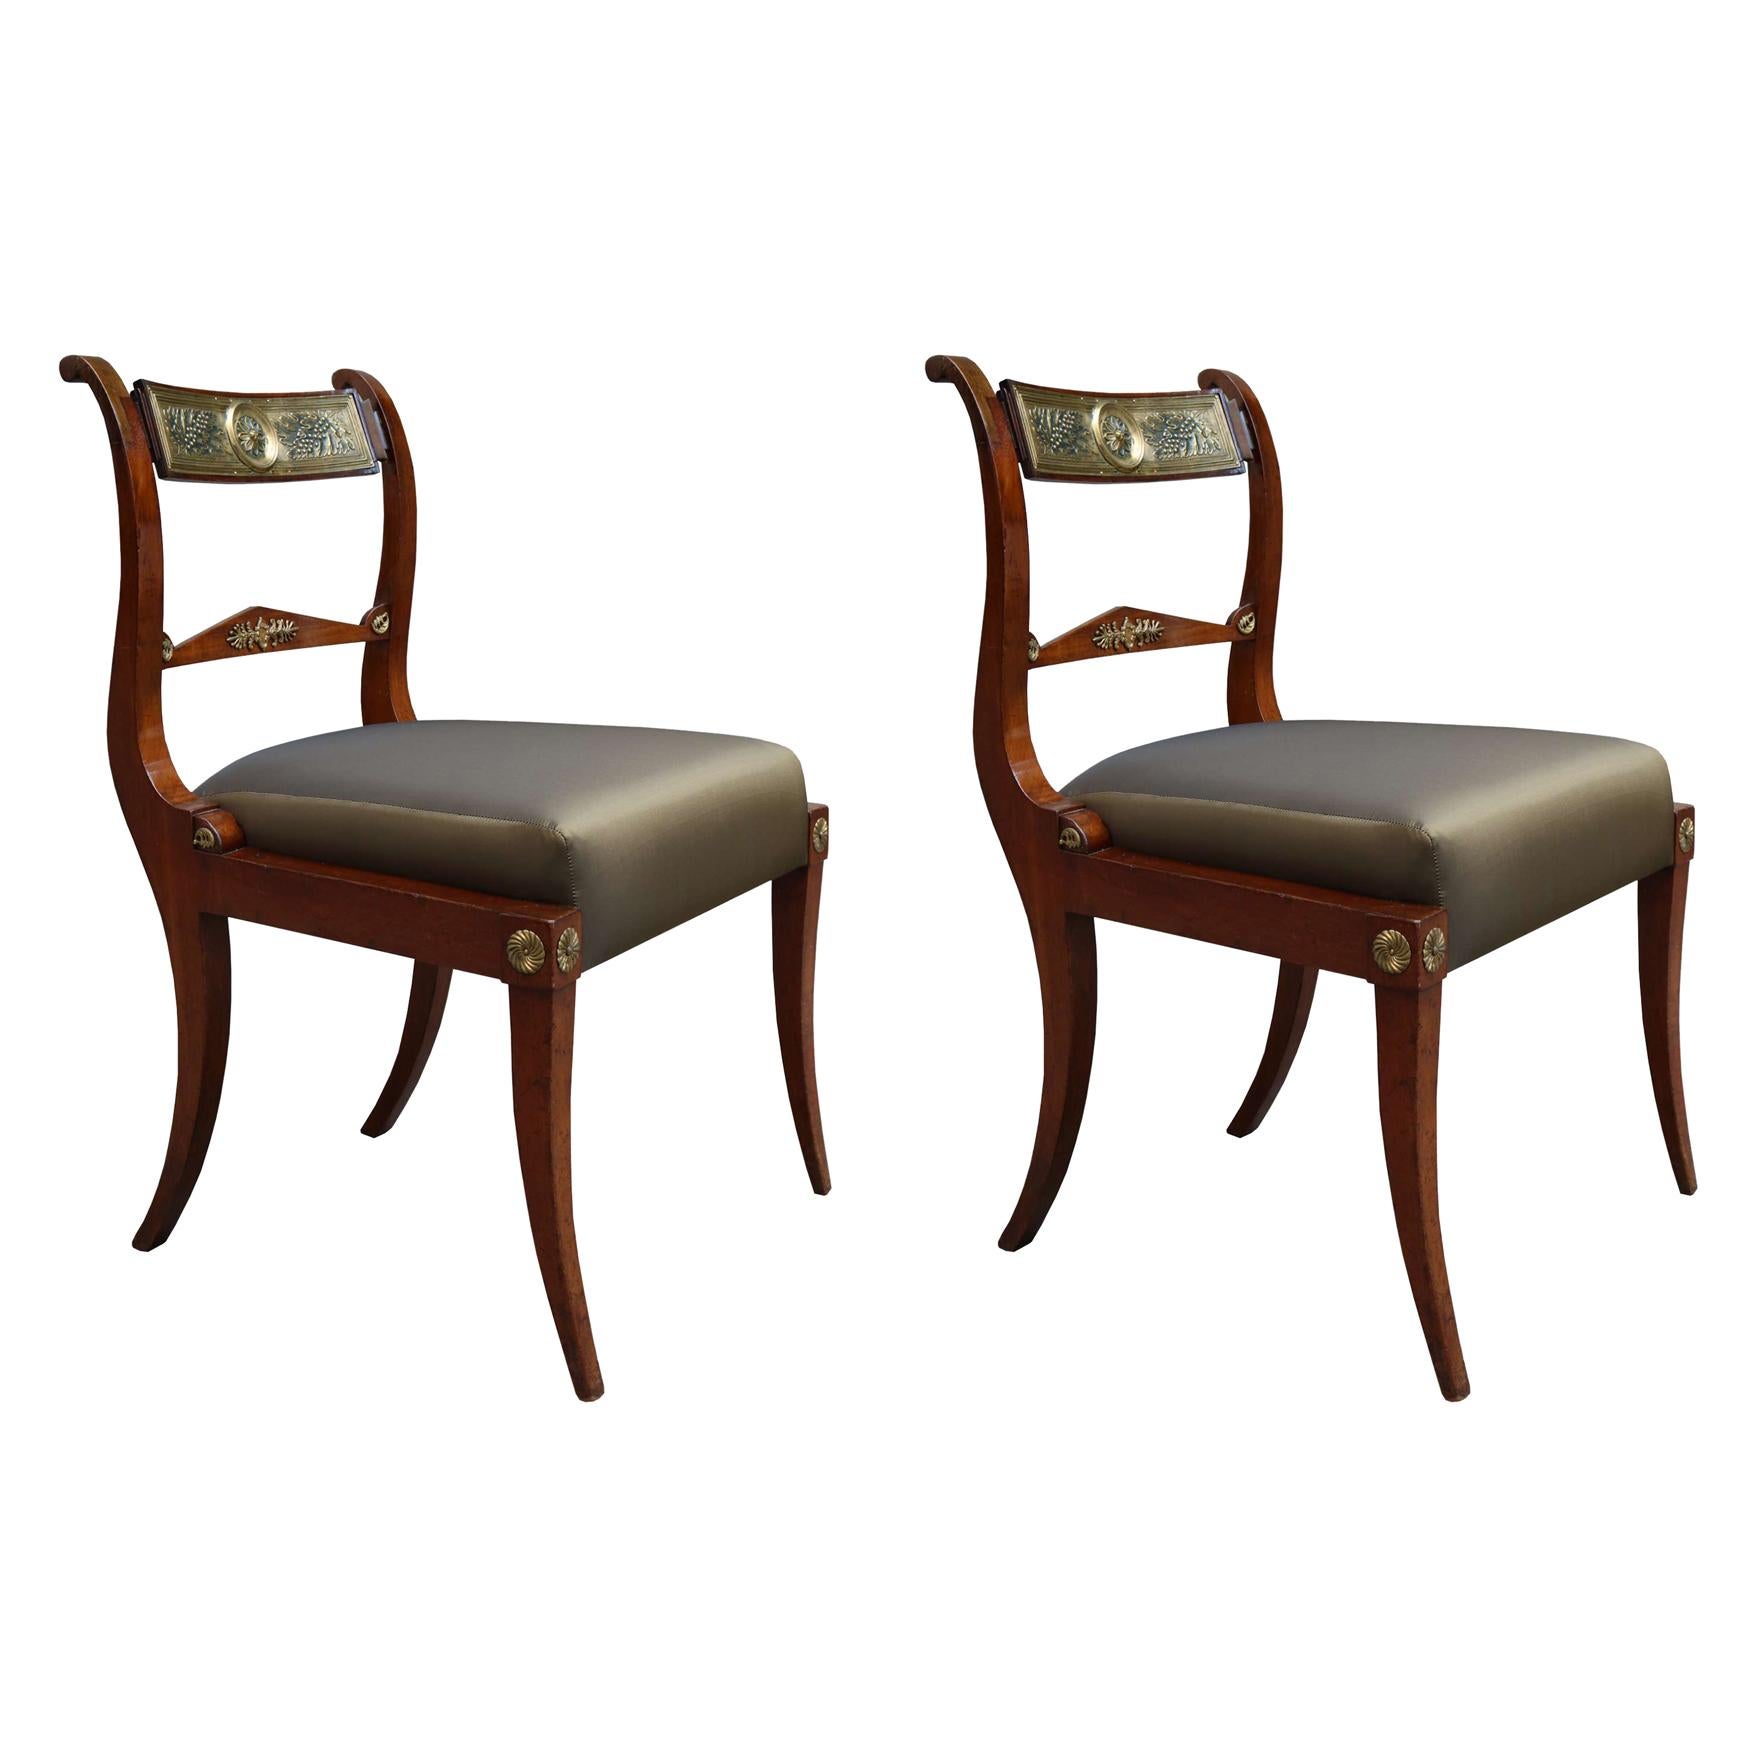 Fine Pair of Neoclassical Side Chairs, 1st Half 19th Century